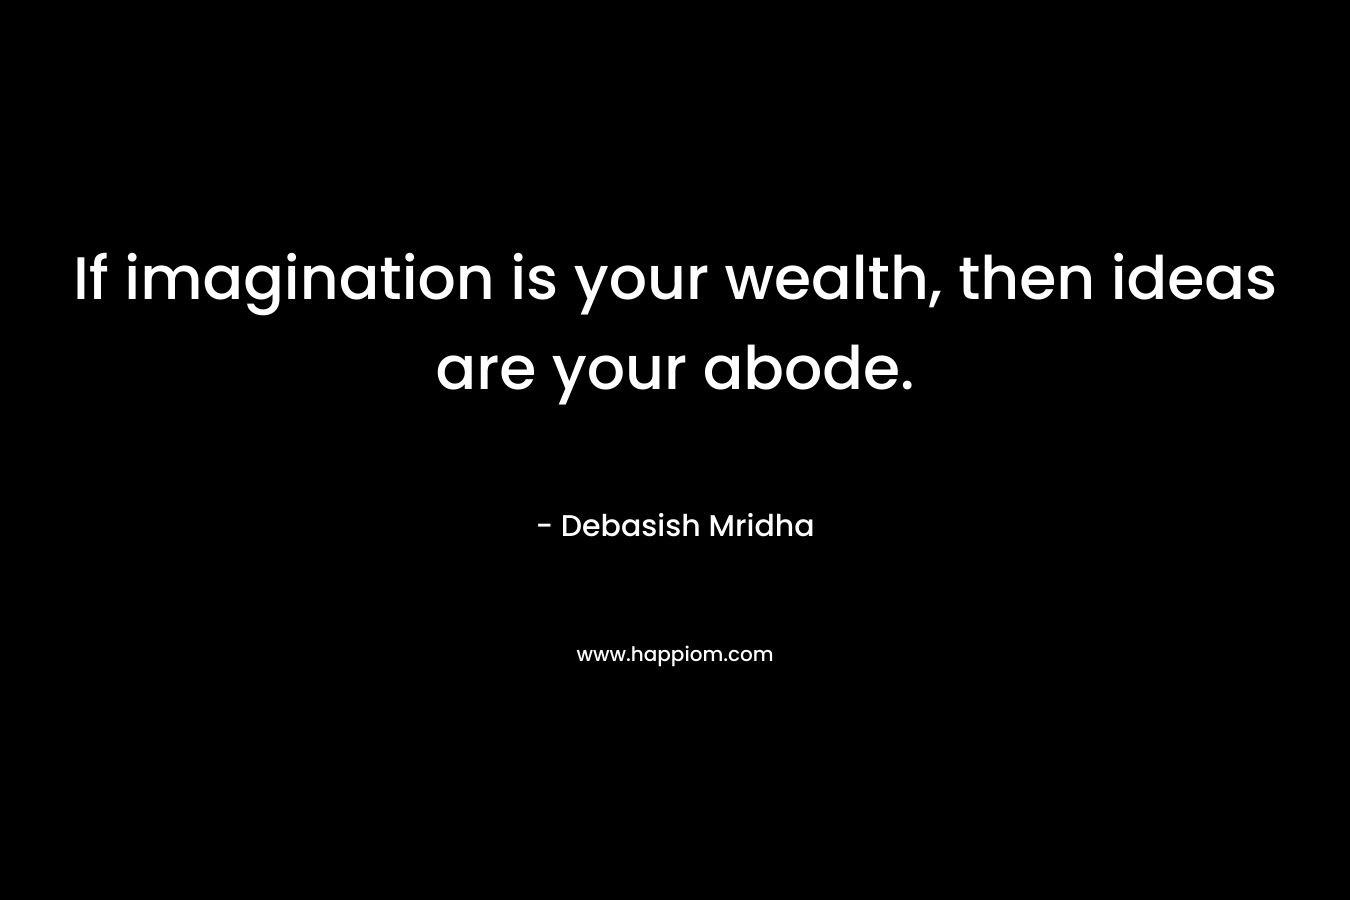 If imagination is your wealth, then ideas are your abode.